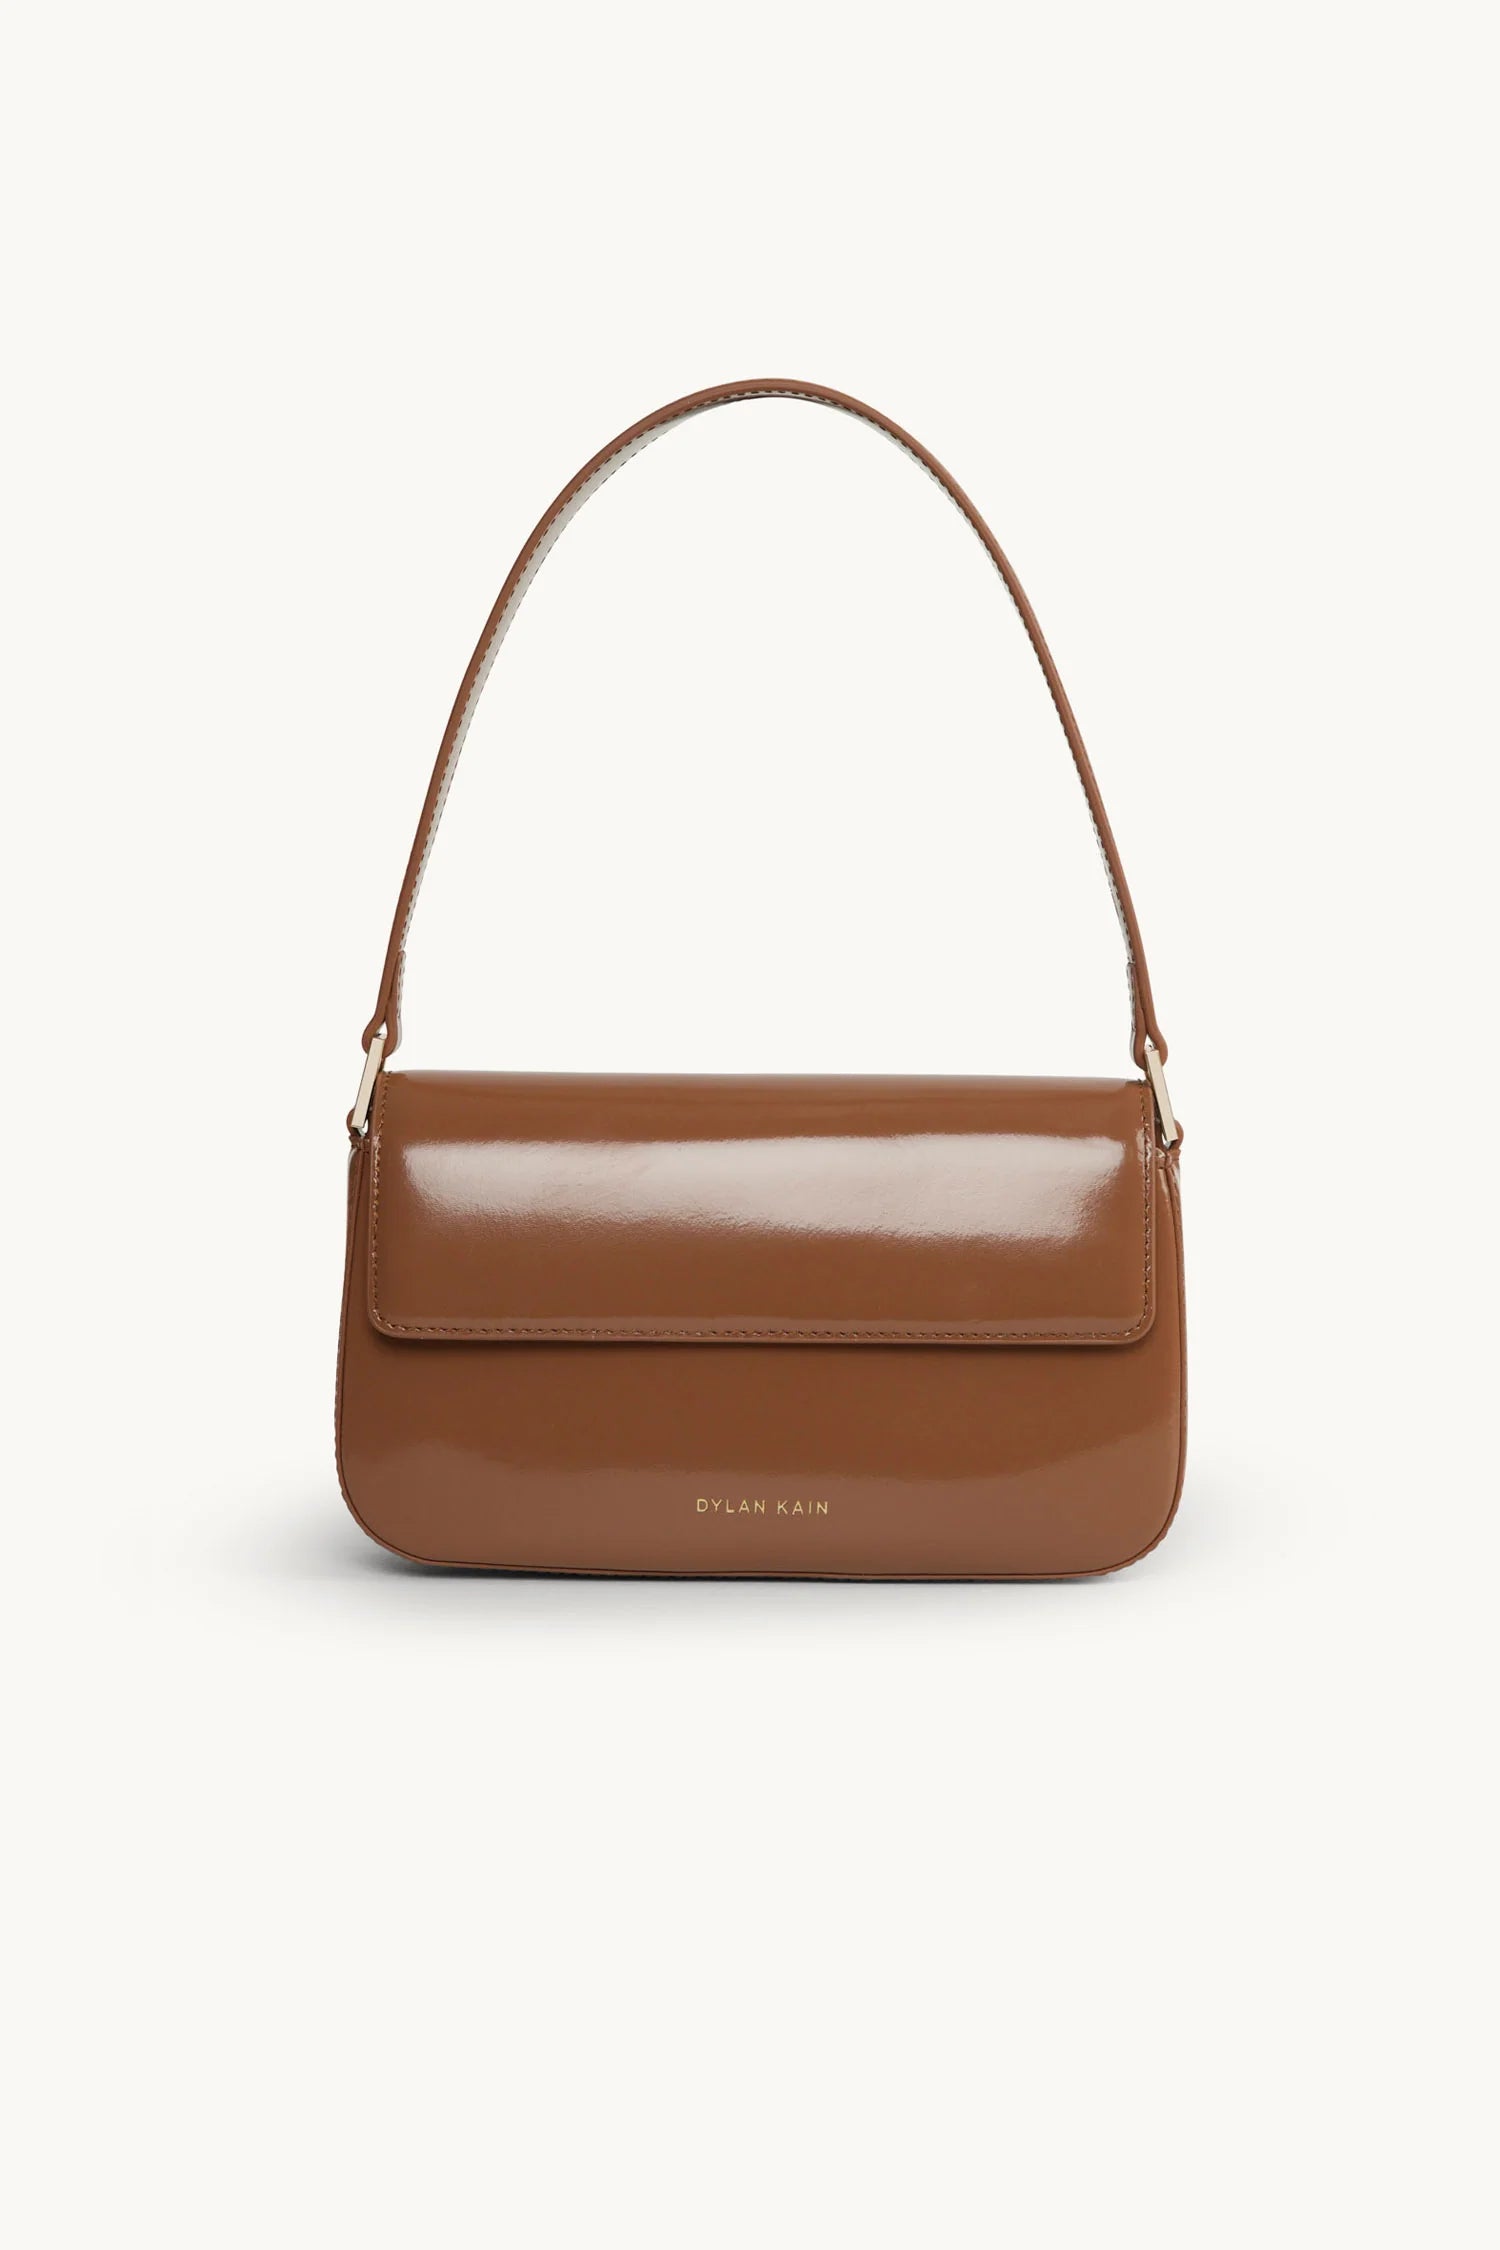 The Baguette Patent Bag - Chocolate/Light Gold